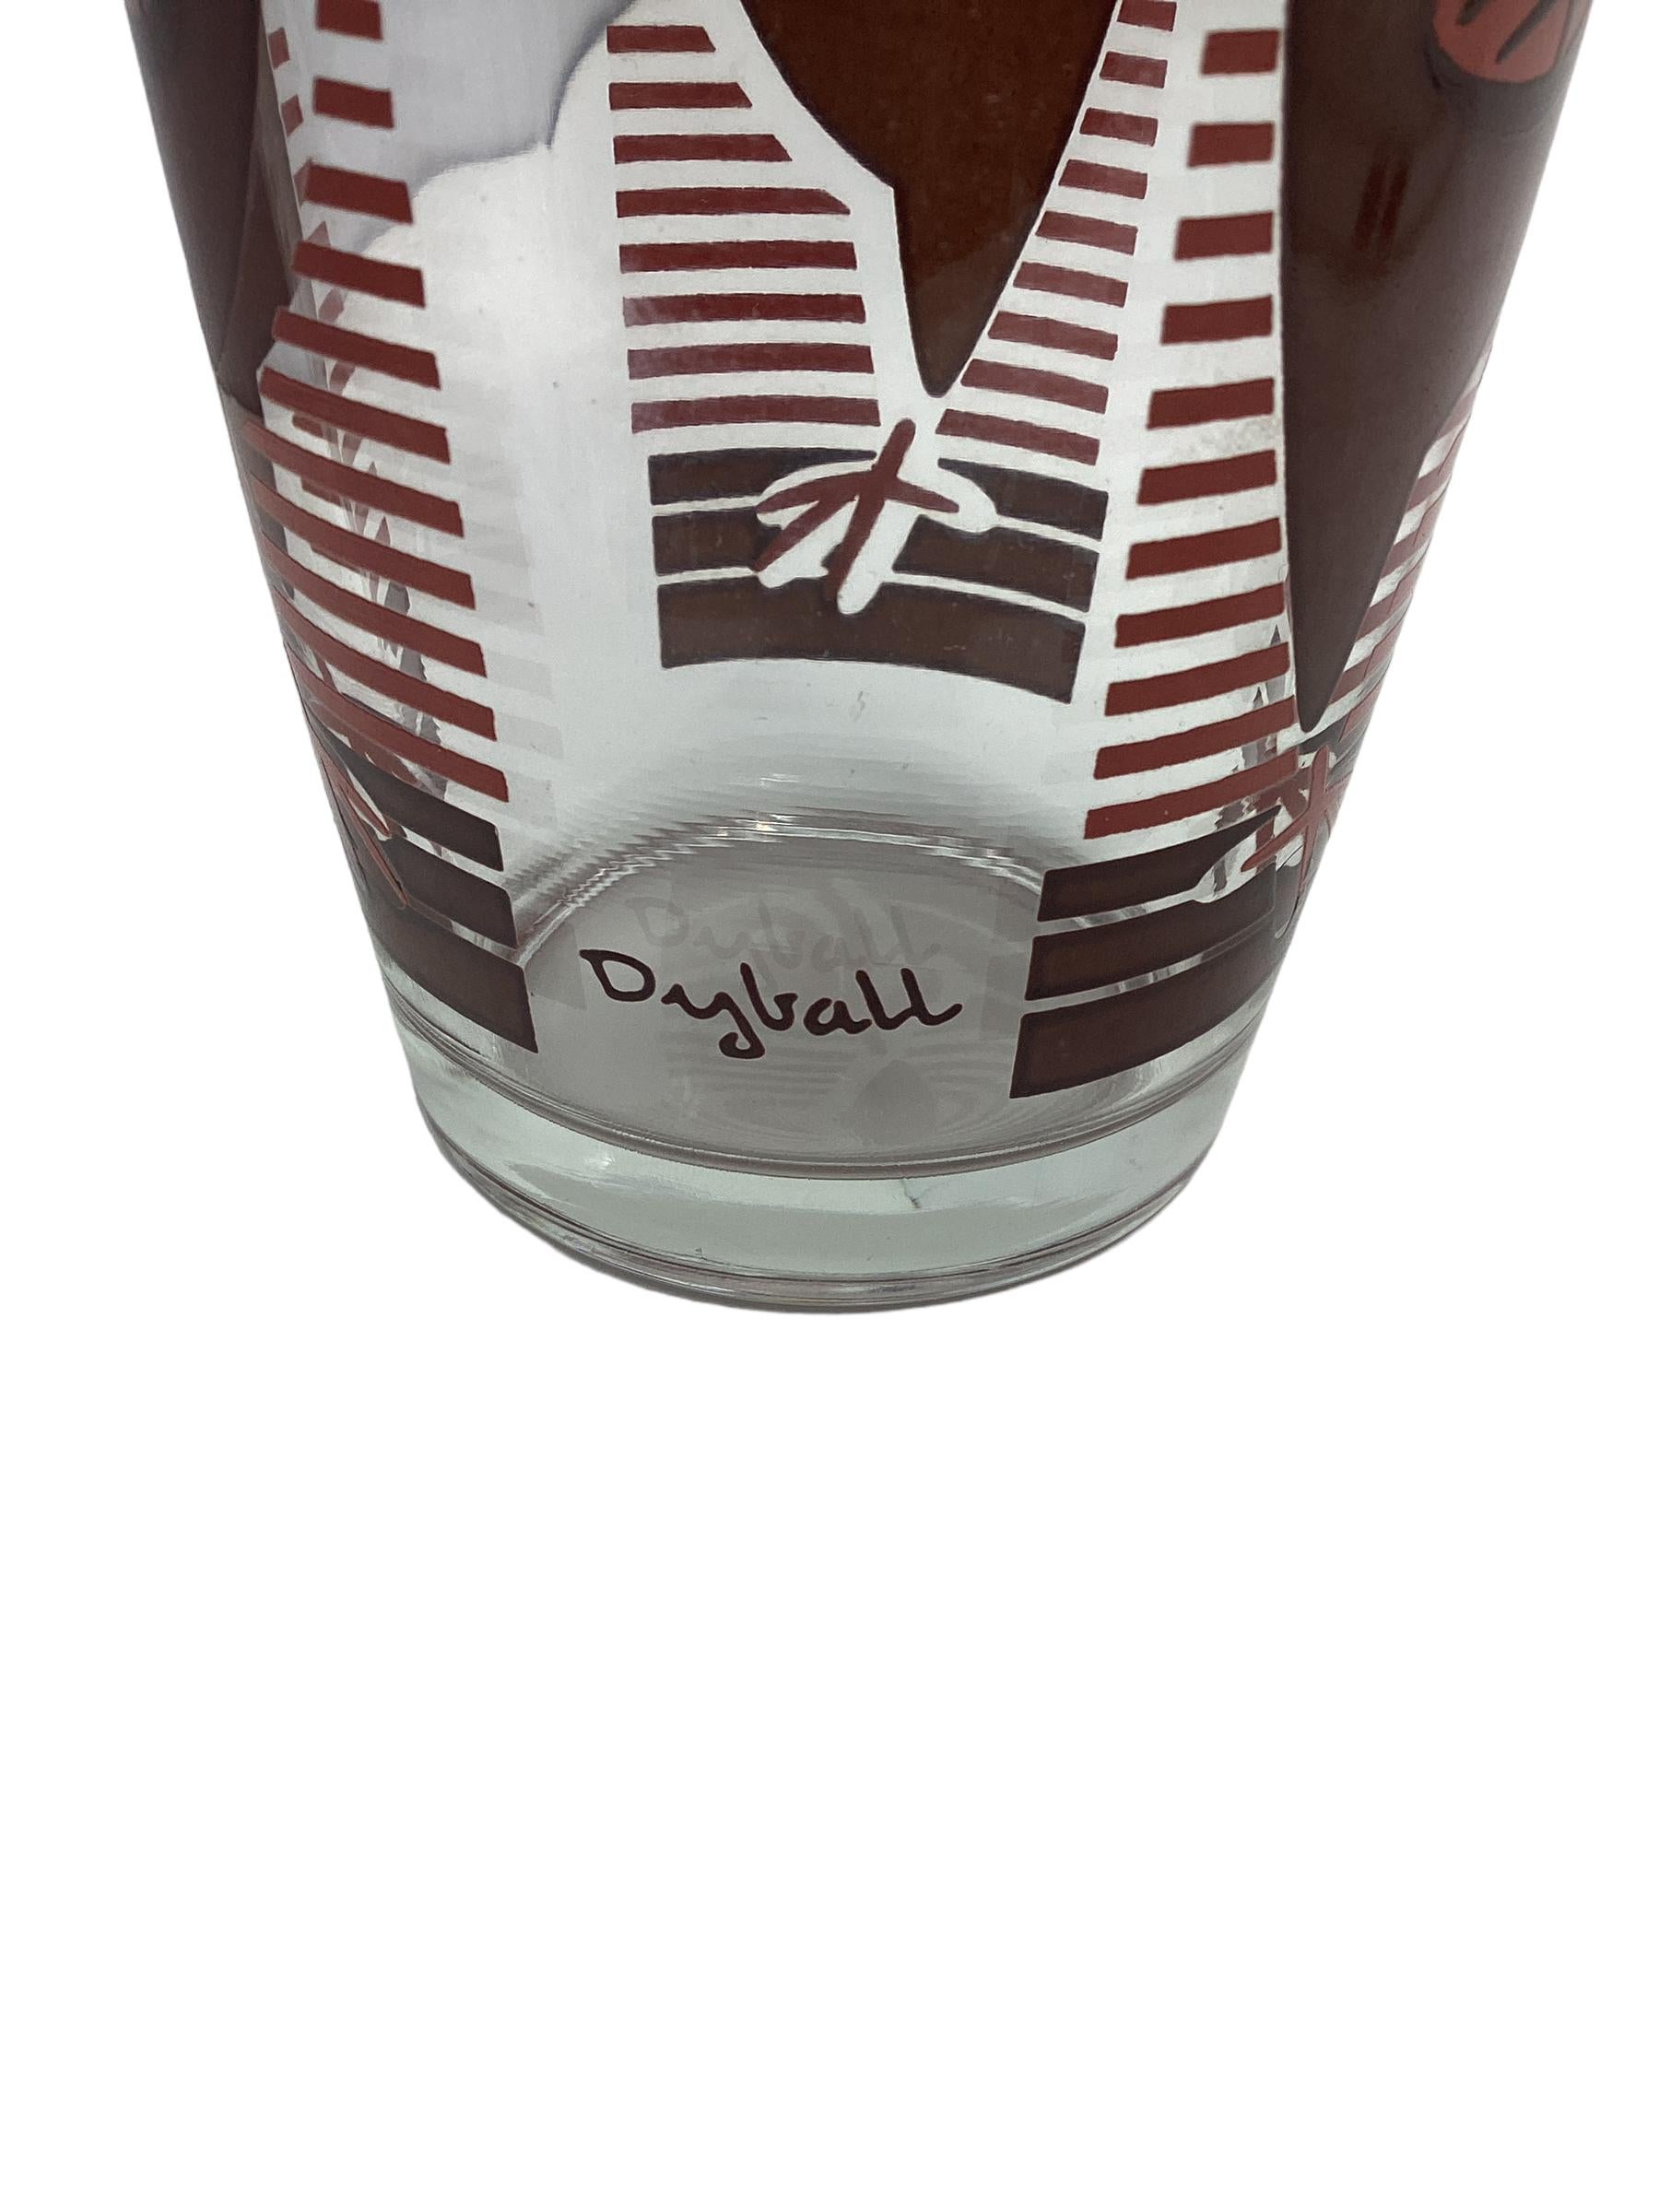 Vintage Dyball barware set consisting of a cocktail shaker with matte gold aluminum cover and four cocktail glasses, each piece decorated with stylized birds in rust red and brown enamel. One of the cocktail glass has a chip on the lip as shown in